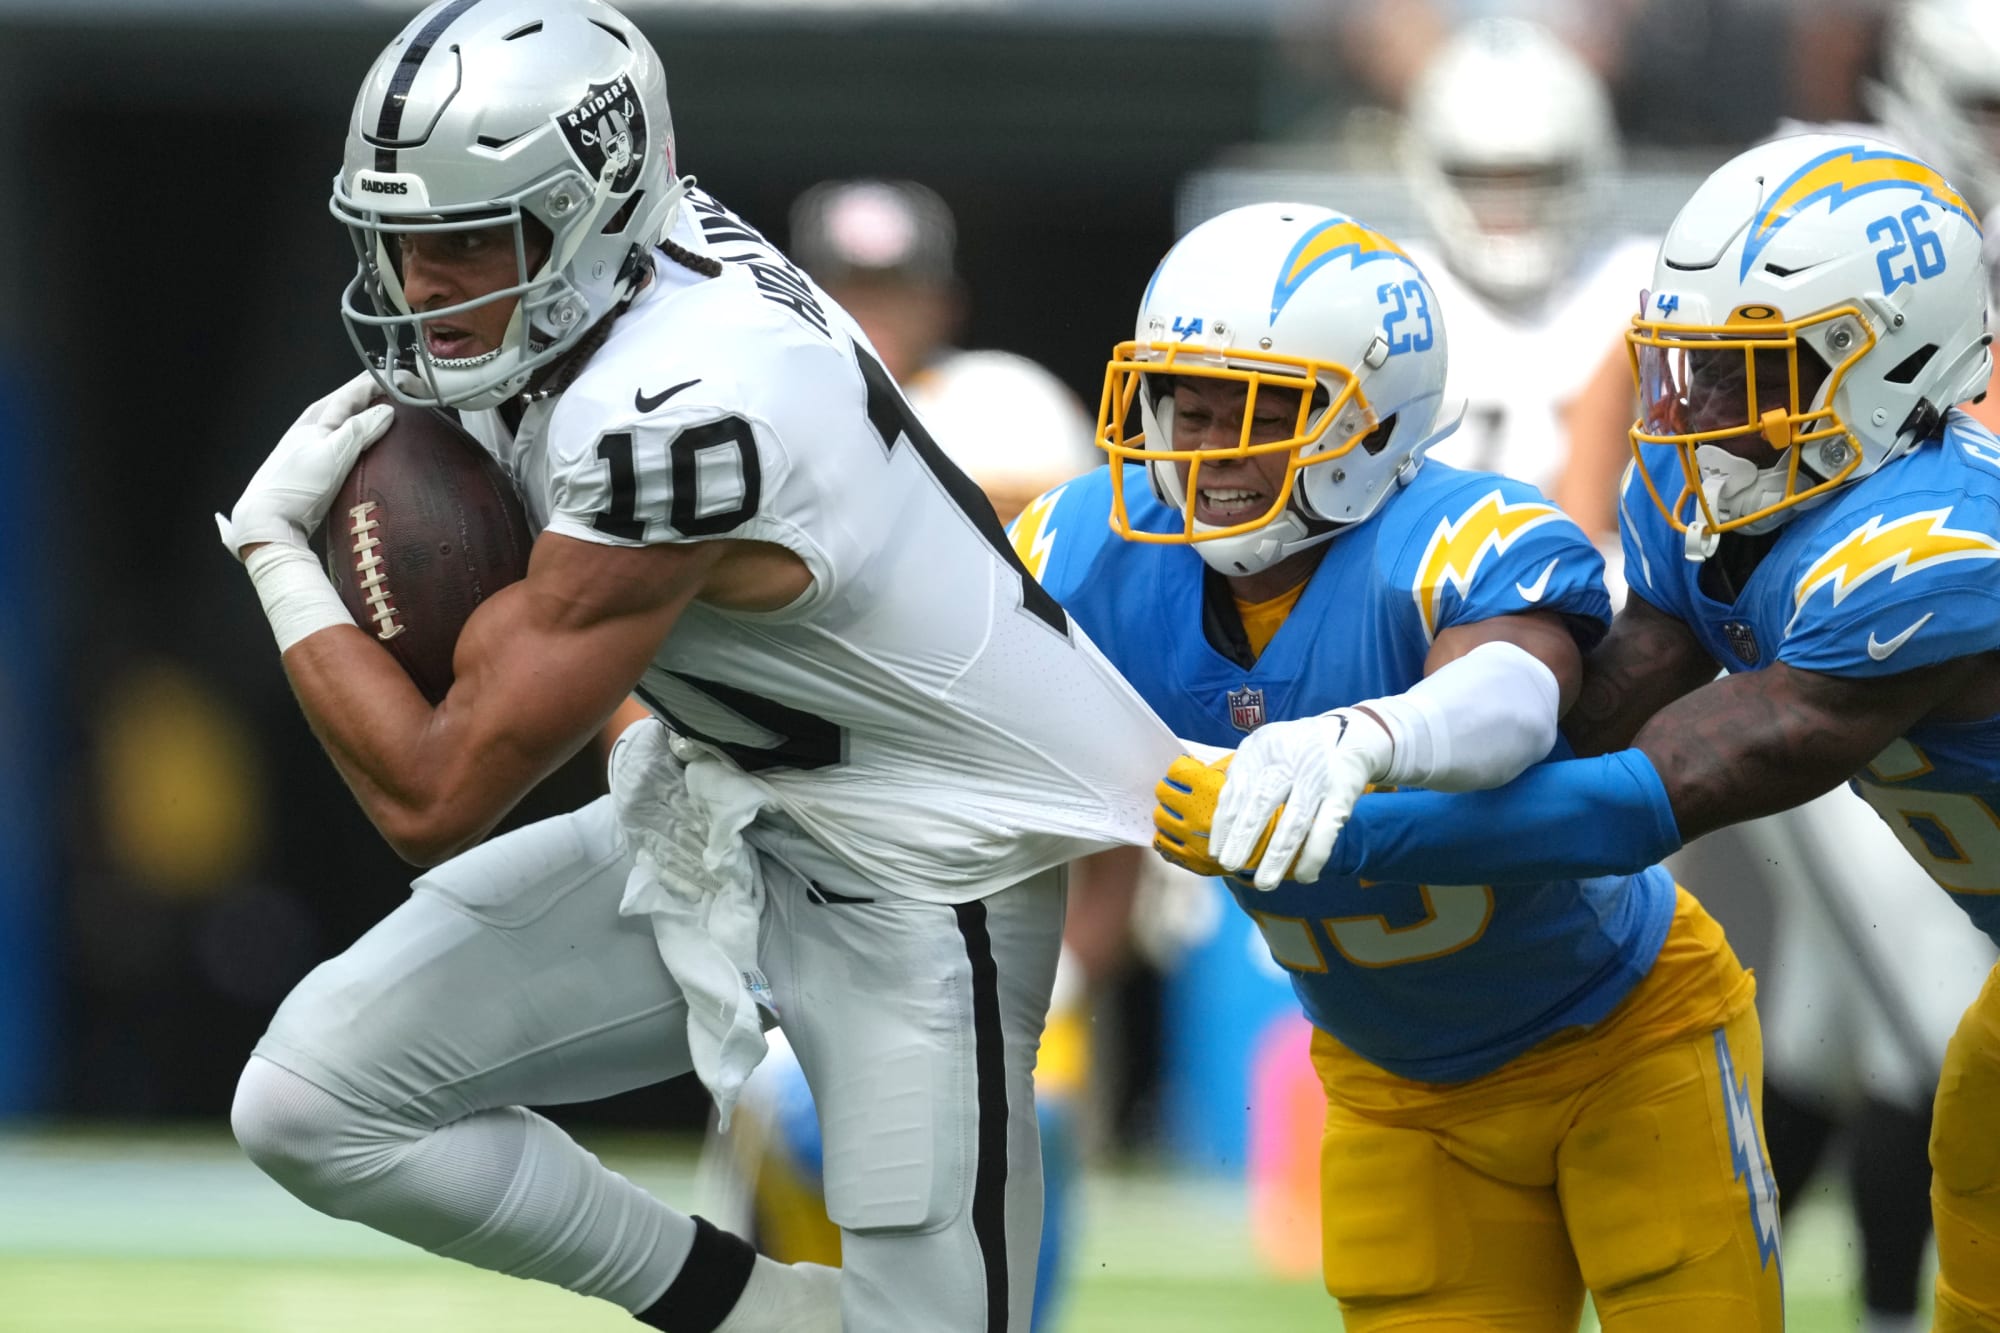 Raiders' wide receiver Mack Hollins ready to make new history